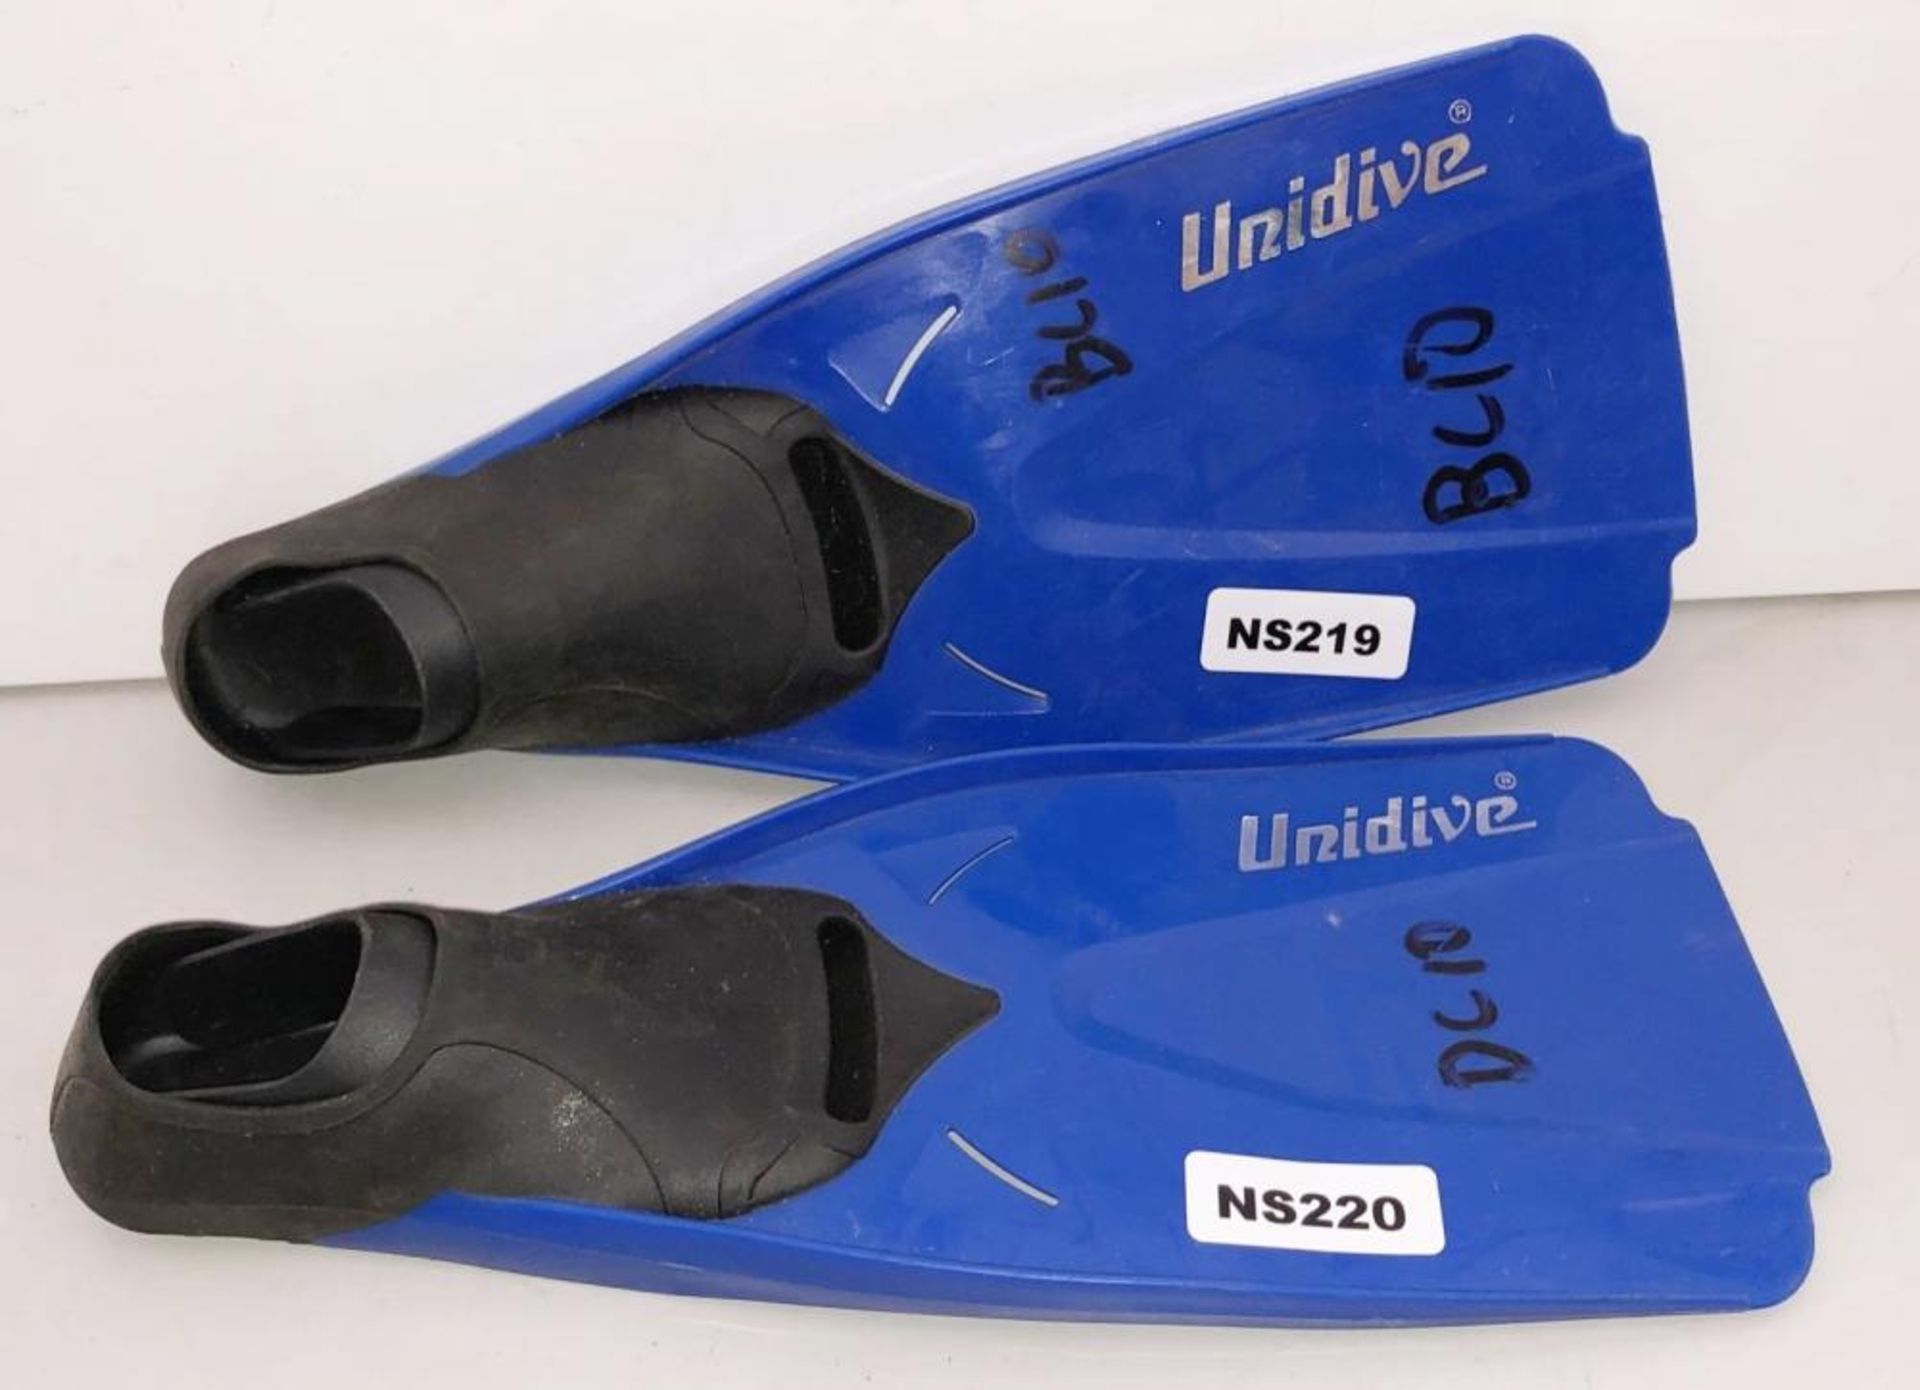 3 x Pairs Of Children's Diving Fins - CL349 - Location: Altrincham WA14